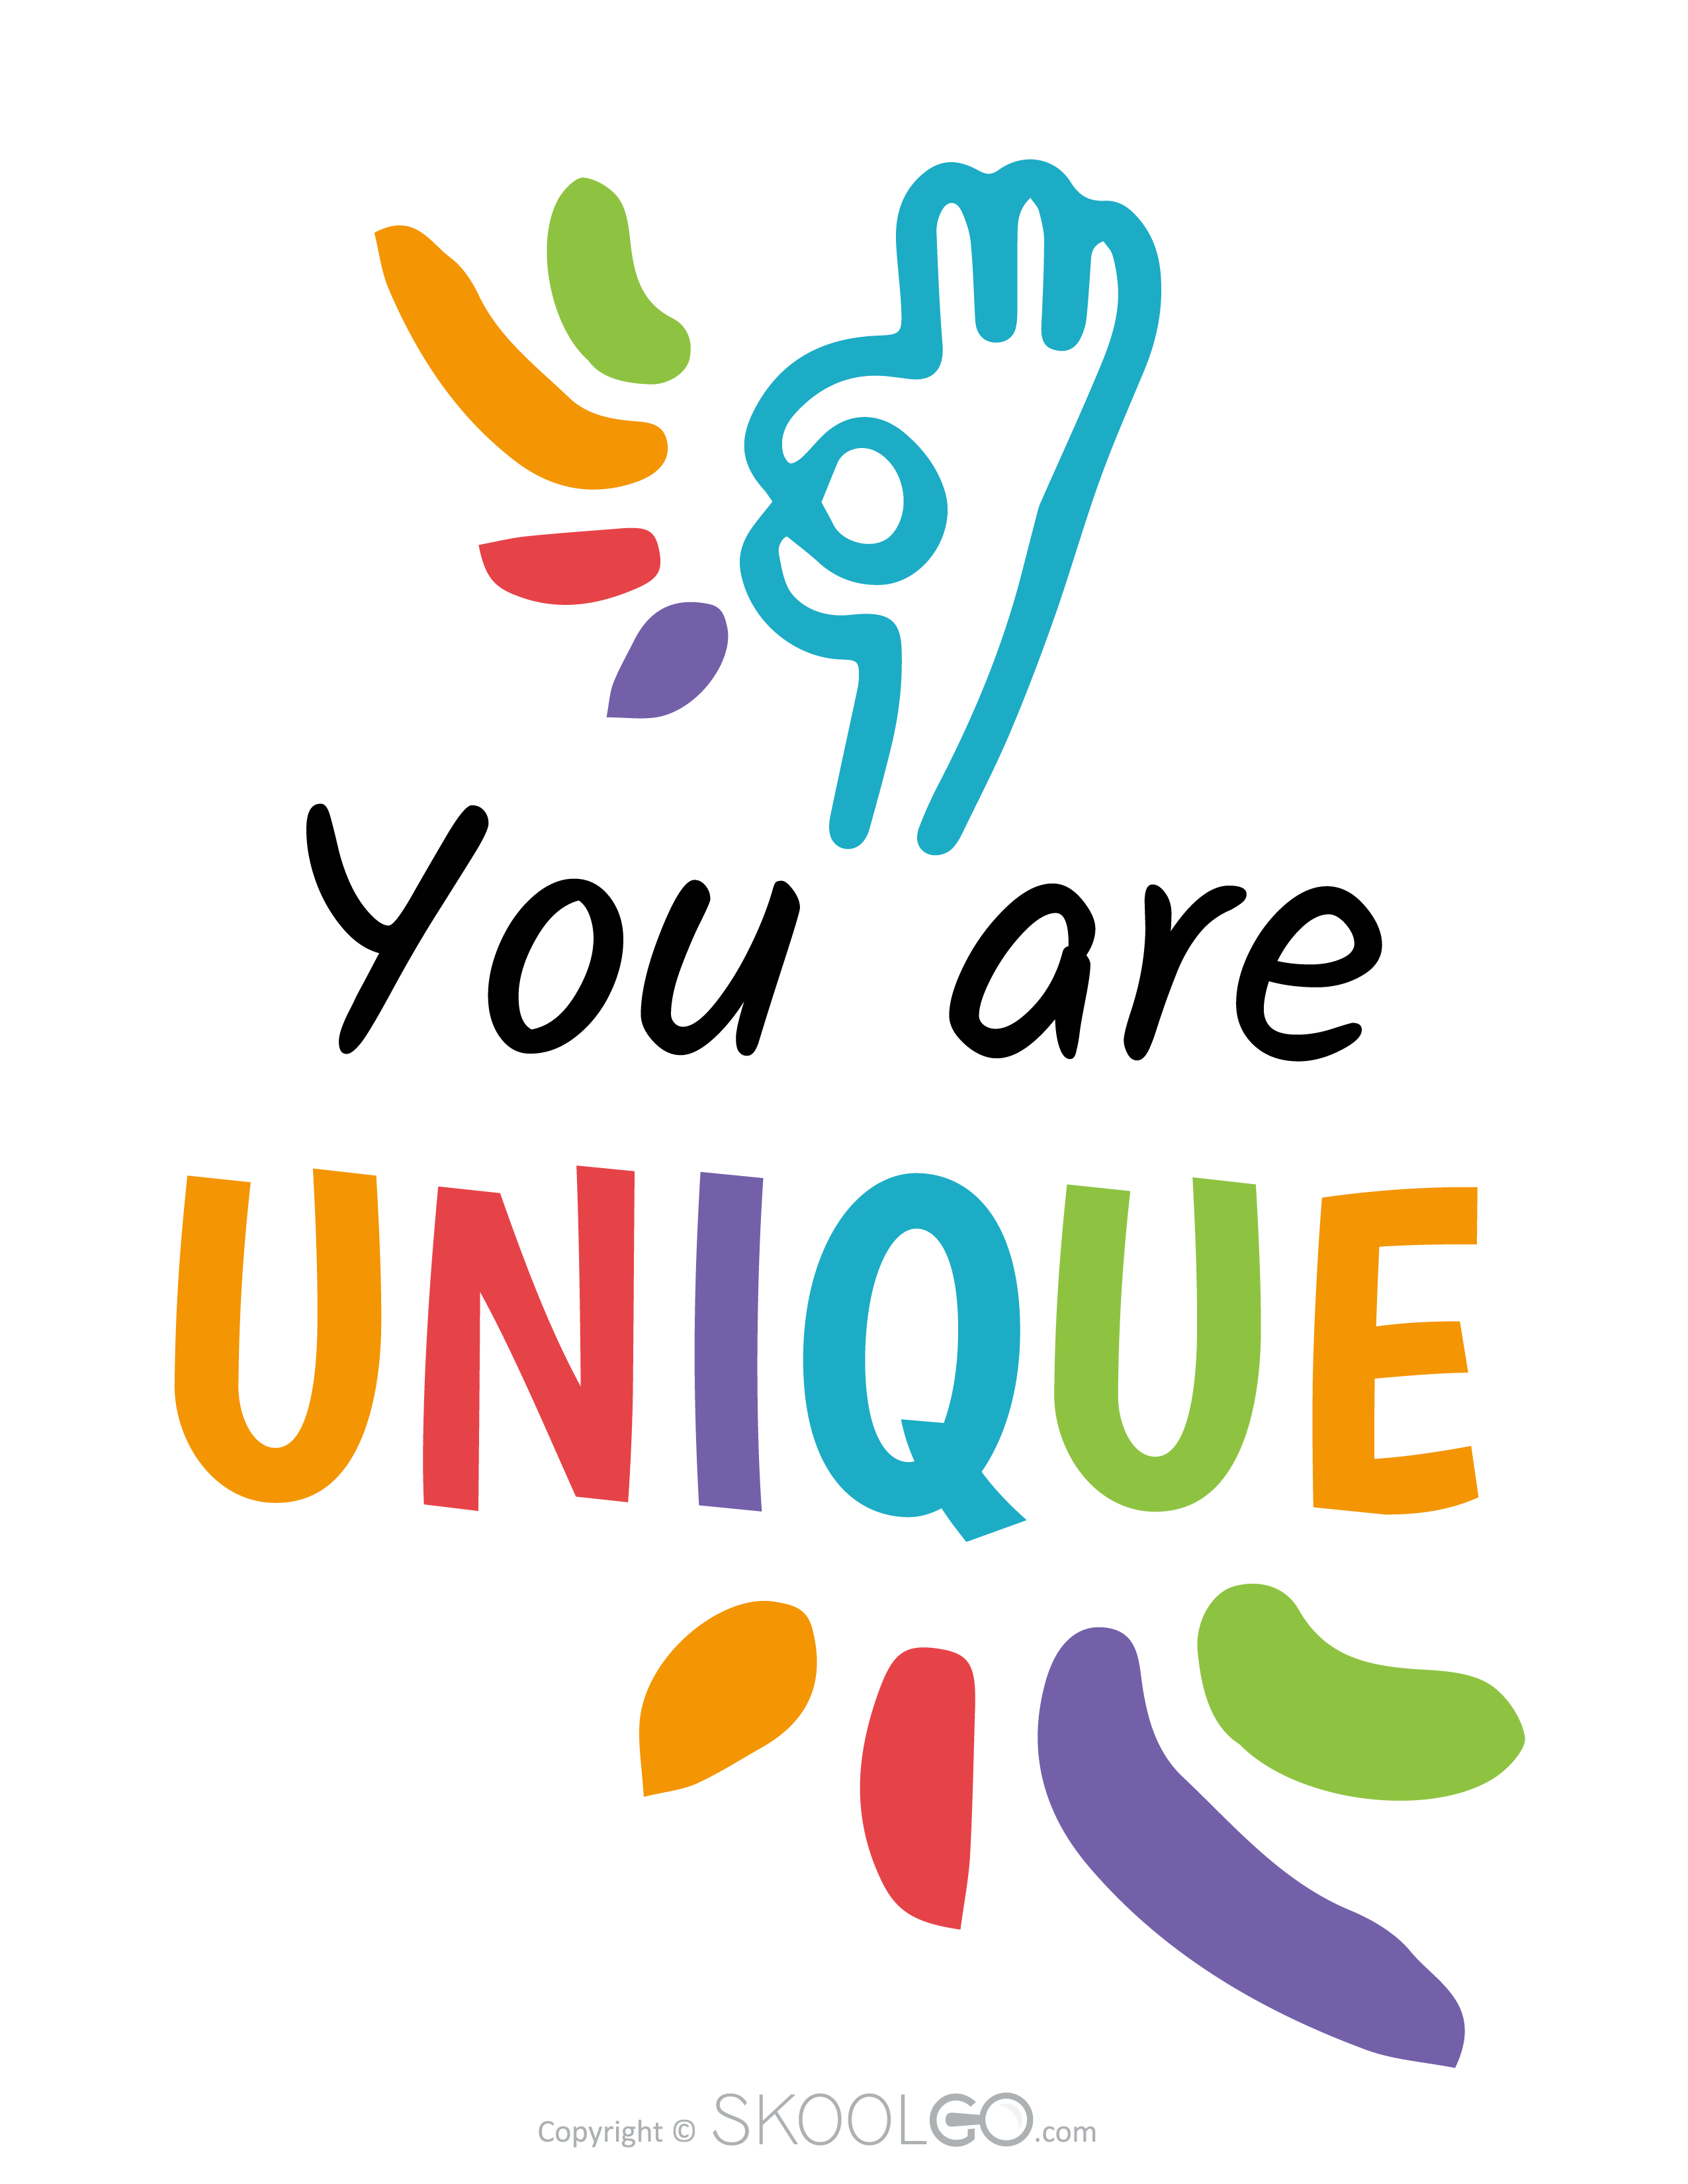 You Are Unique - Free Poster